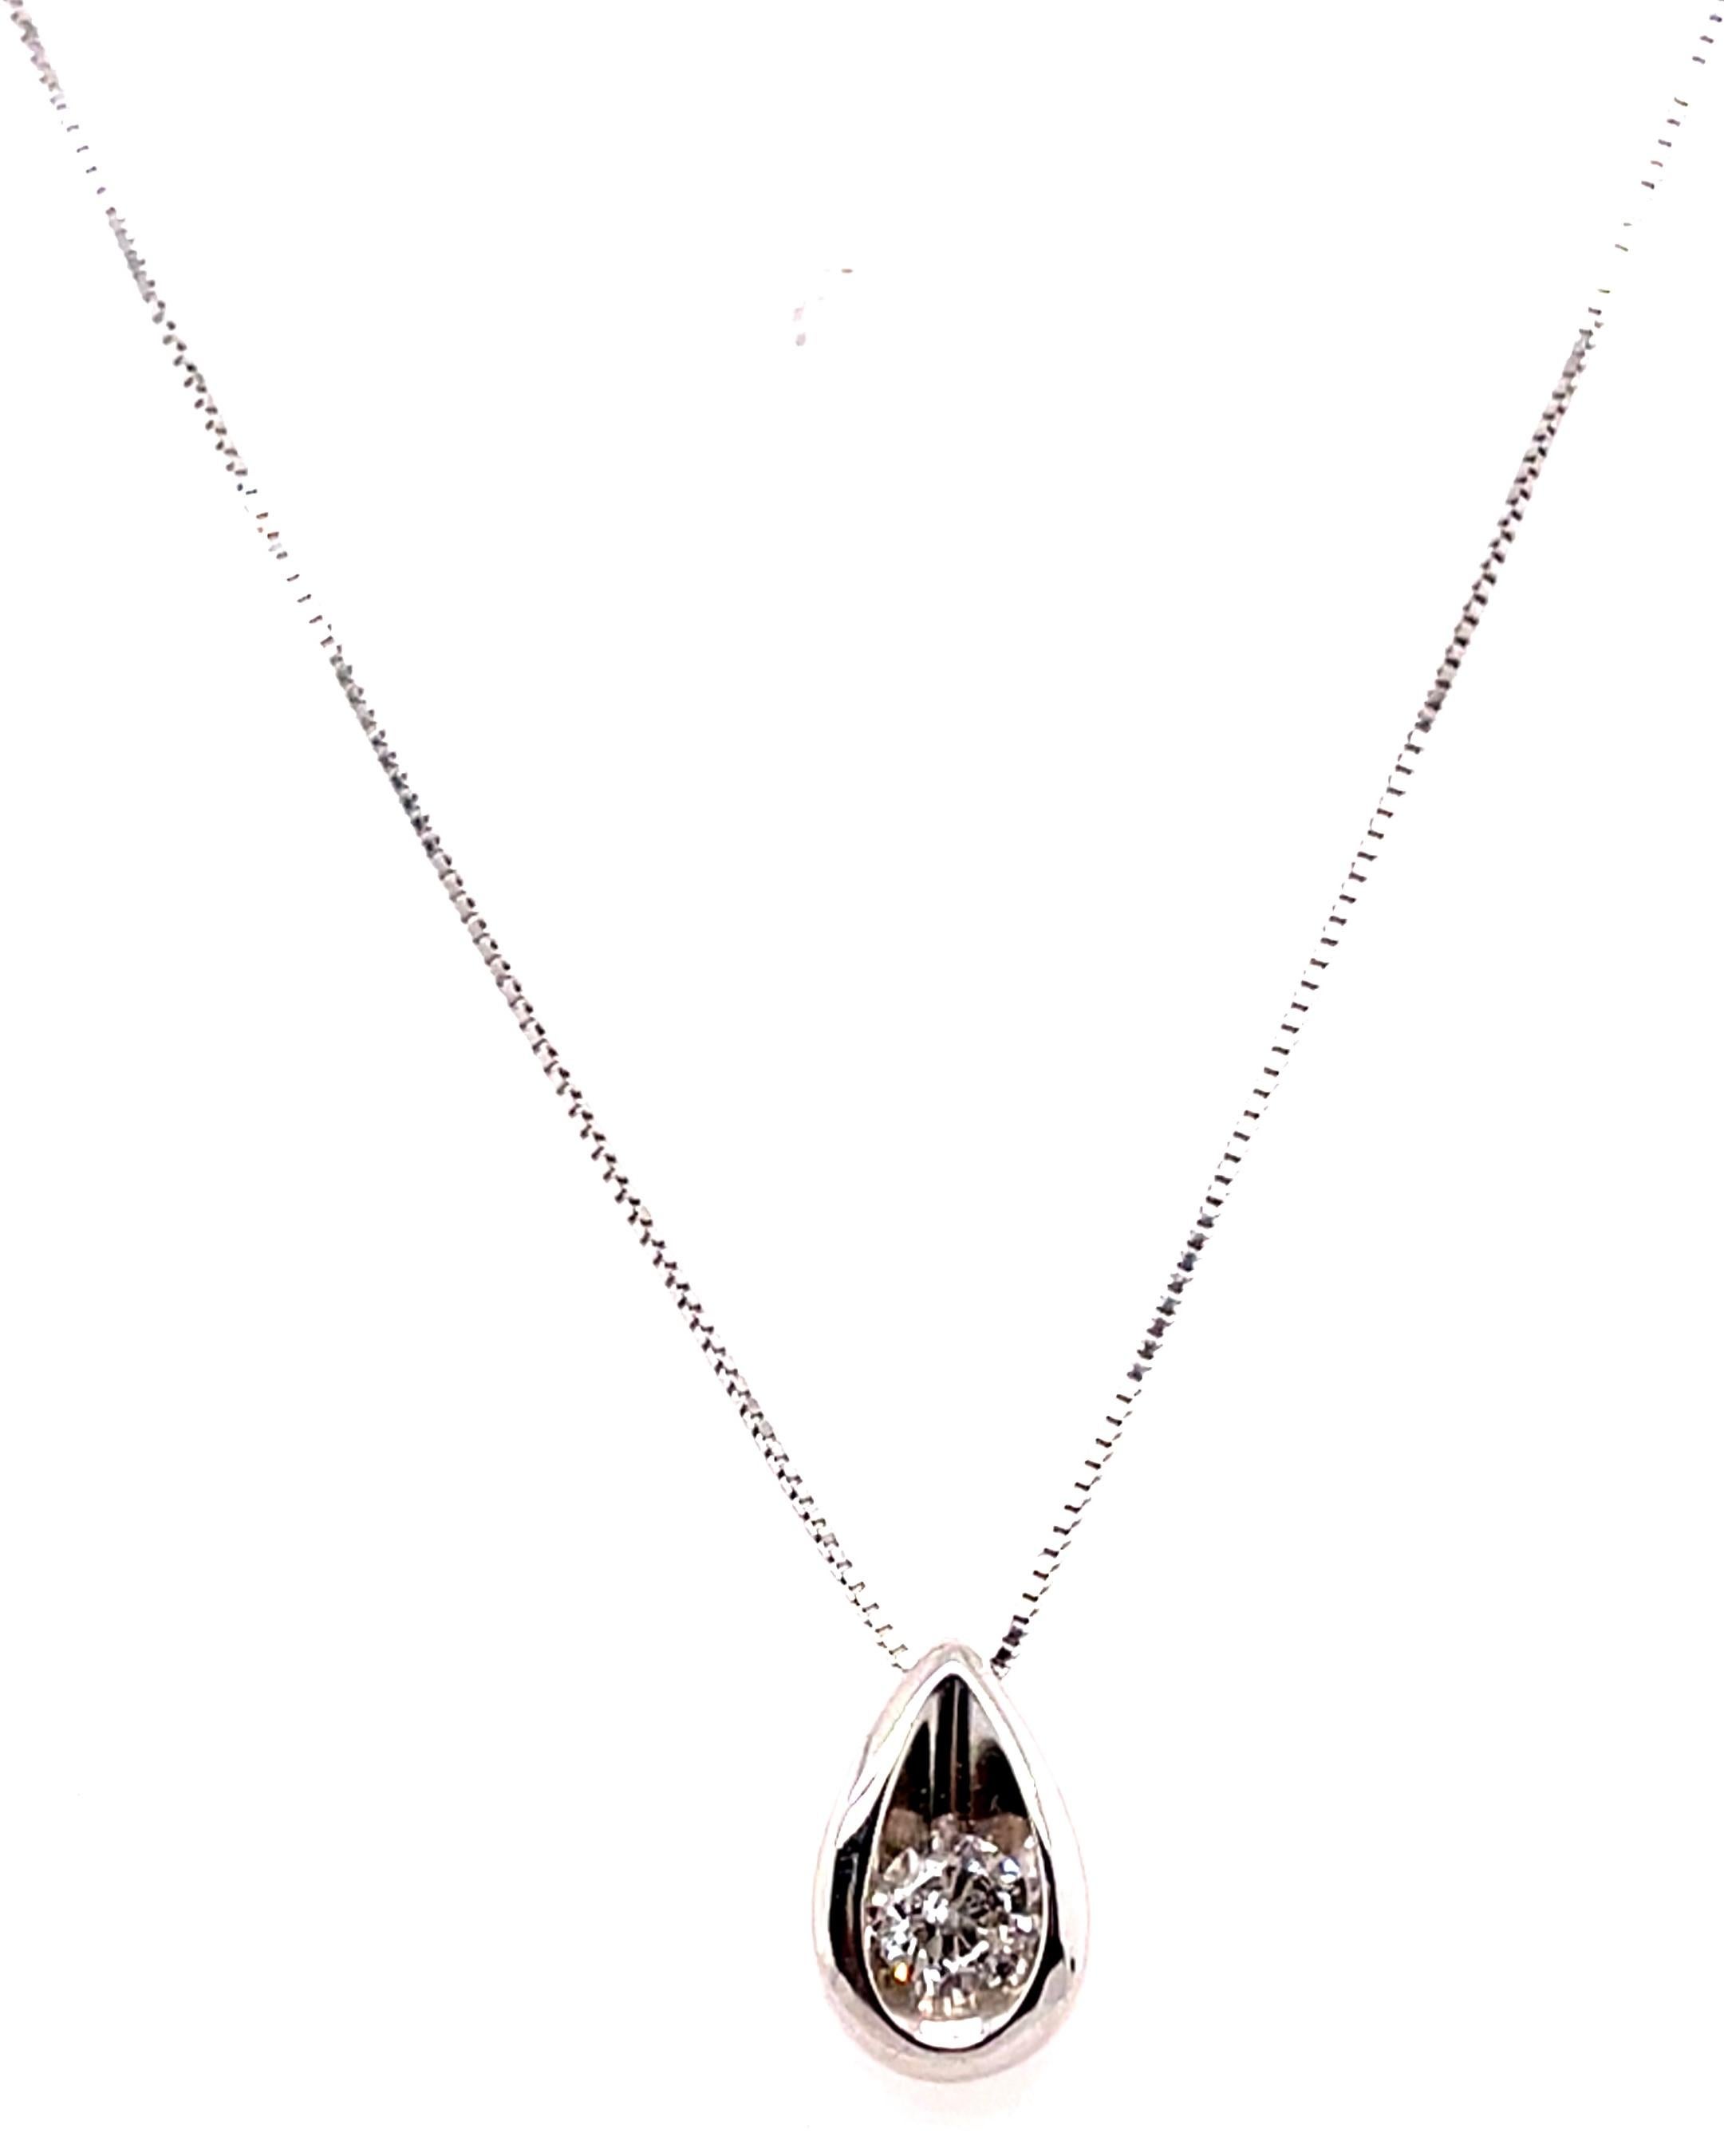 14 Karat White Gold 16 Inch Free Form Necklace with Diamond Pendant.
0.50 total diamond weight
2 grams total weight.